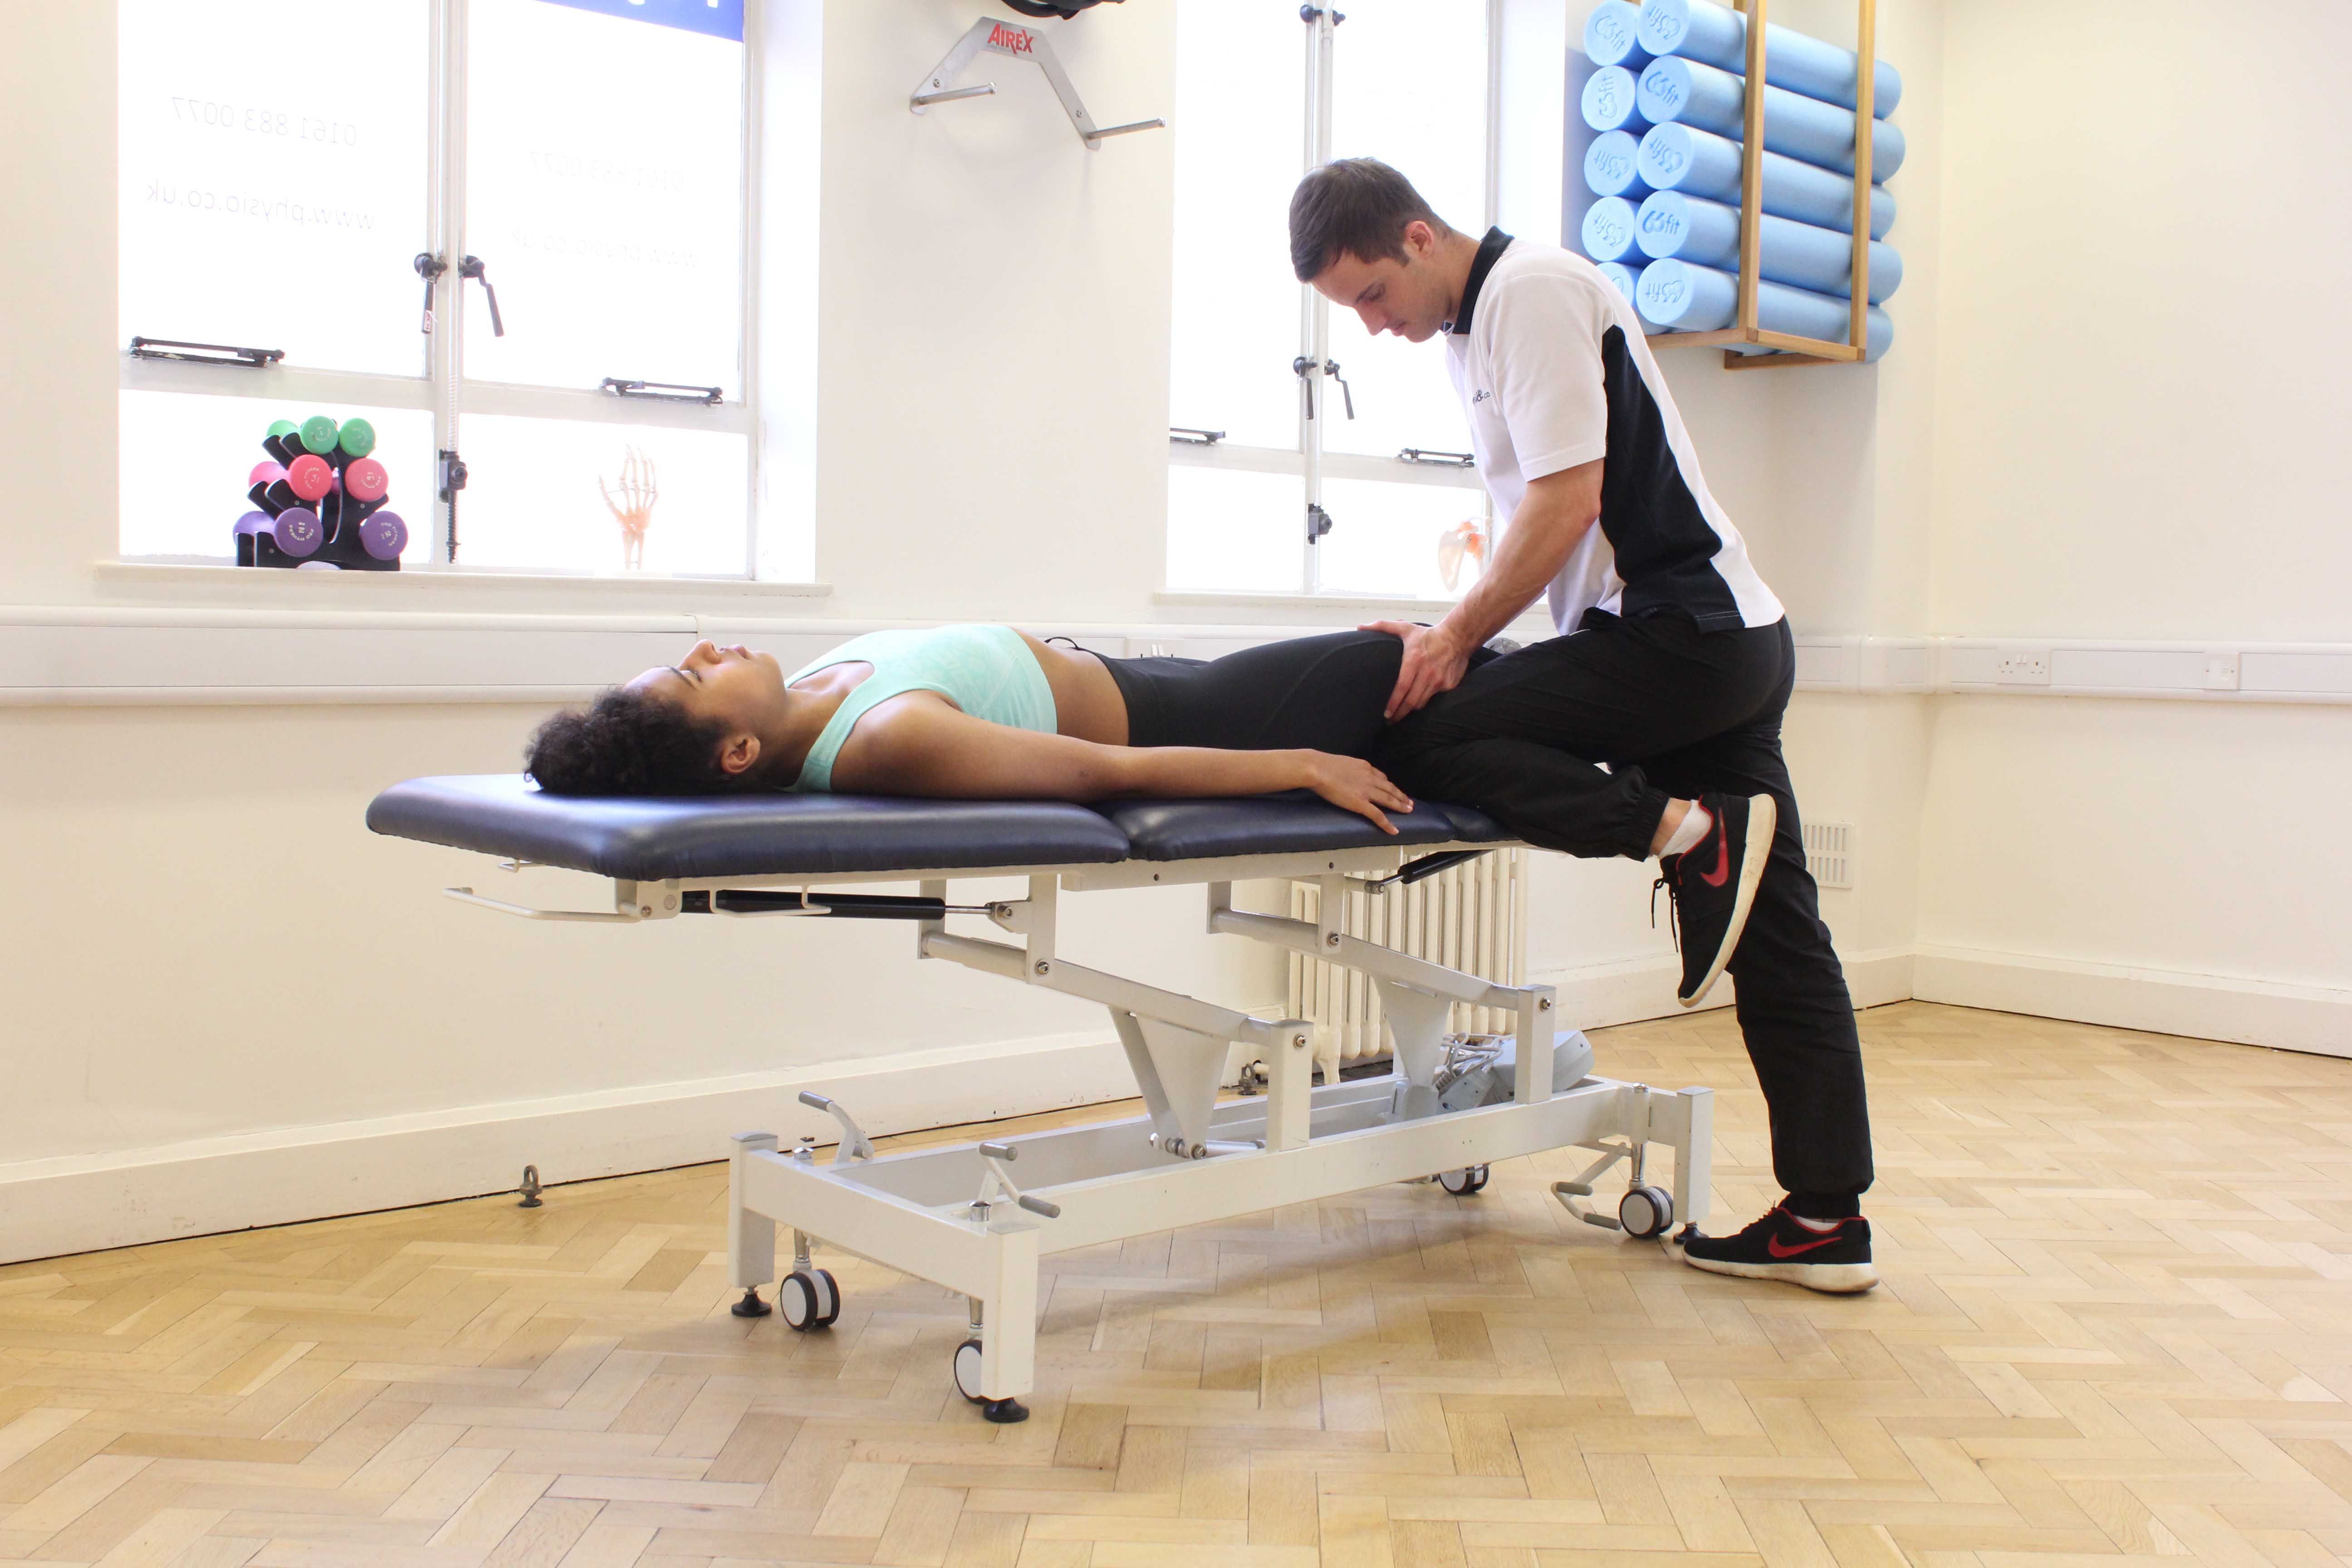 Mobilisations of the lumbar vertebrea by a specilaist physiotherapist